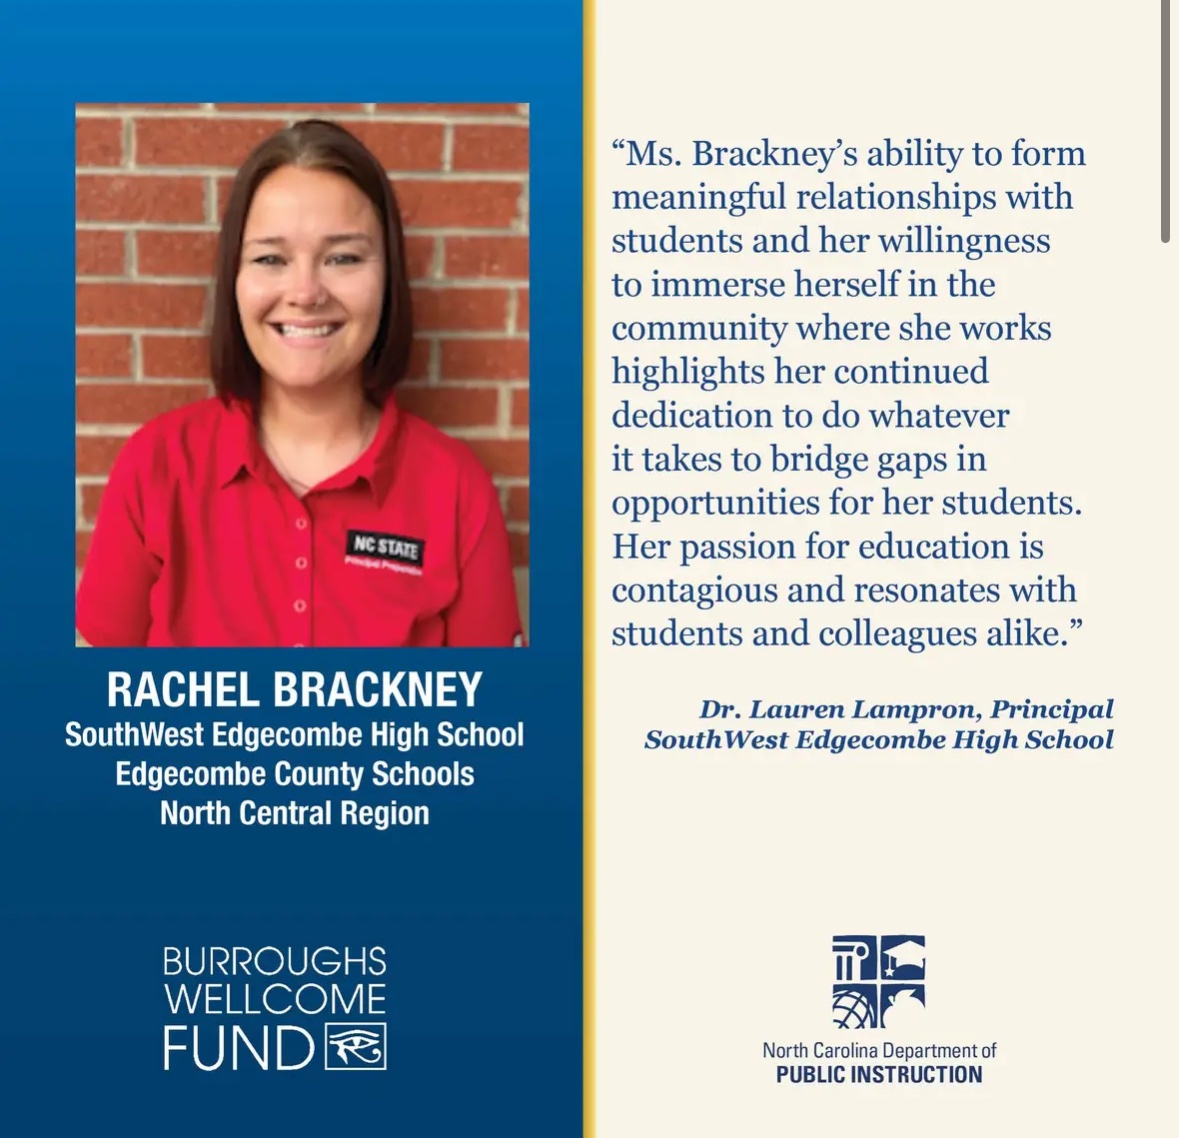 TOY State finalist. 💙🐾. Proud of Rae Brackney — I’ve learned a tremendous amount working with her at the two schools we’ve served together. She is now in the NC State’s Cohort of Principal Fellows to increase her influence. #NCTOYPOY @NCStateCED @NCPFellows